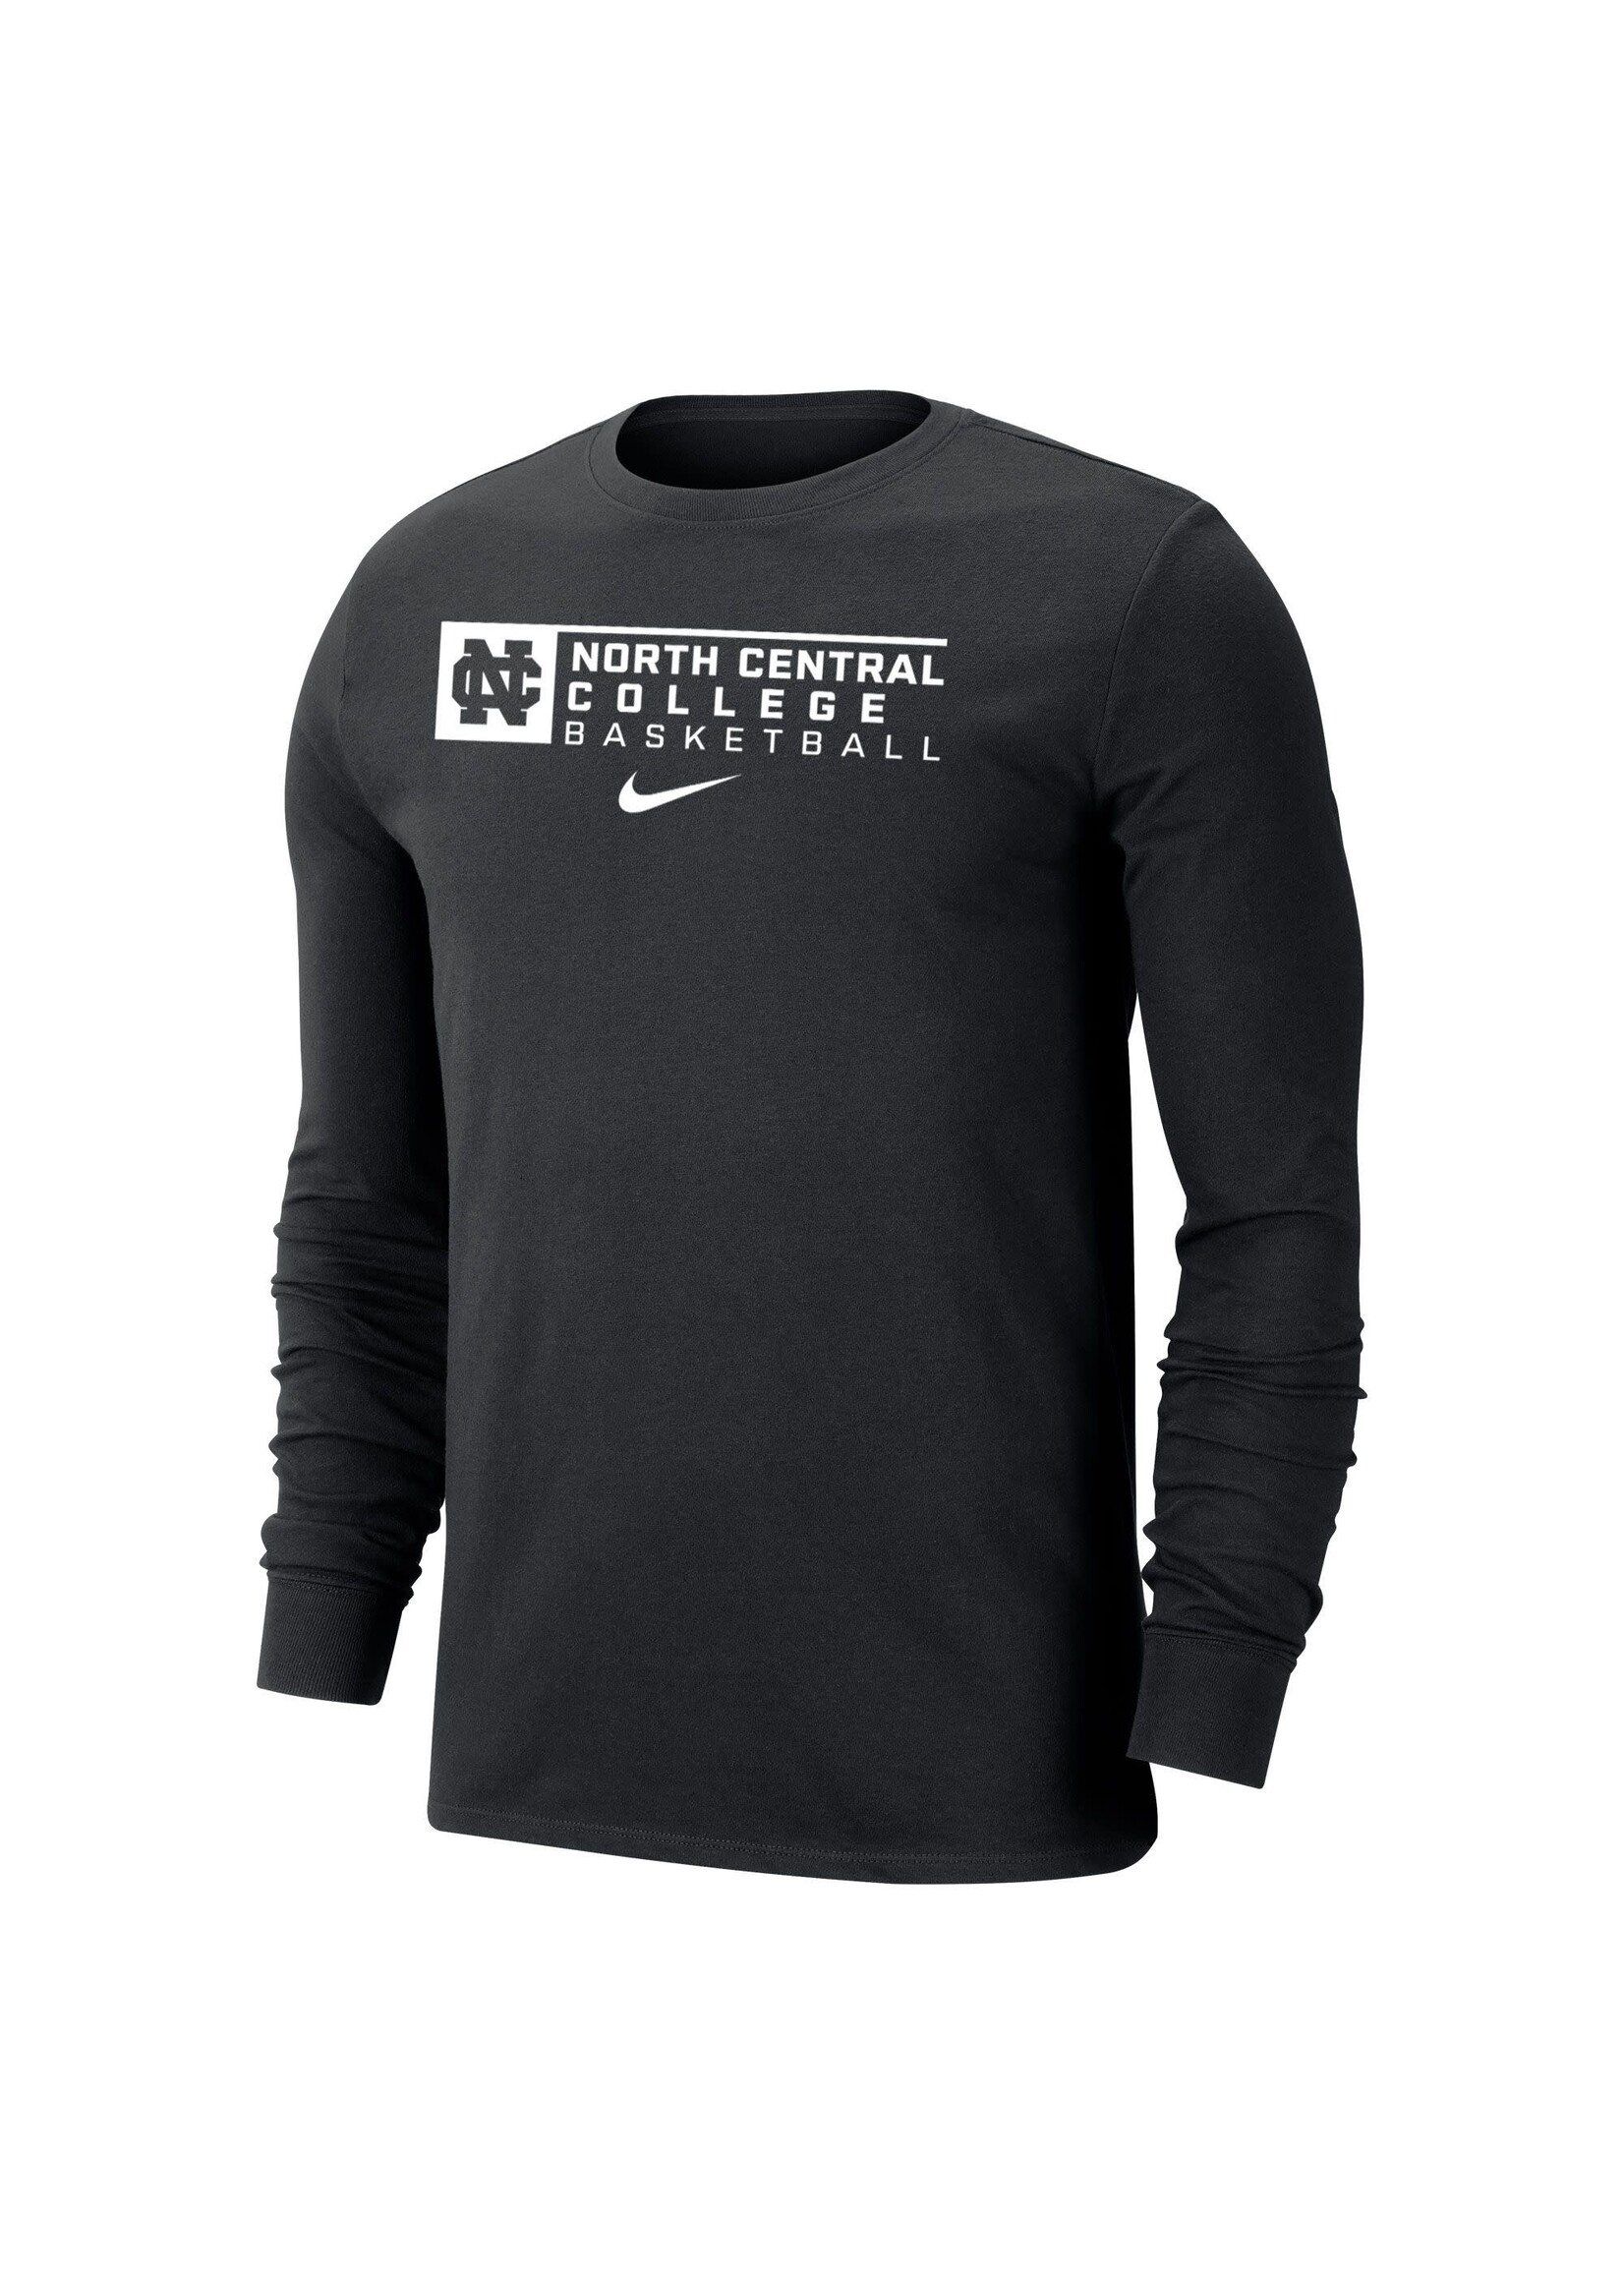 Nike North Central College Nike Basketball Dri Fit Long Sleeve